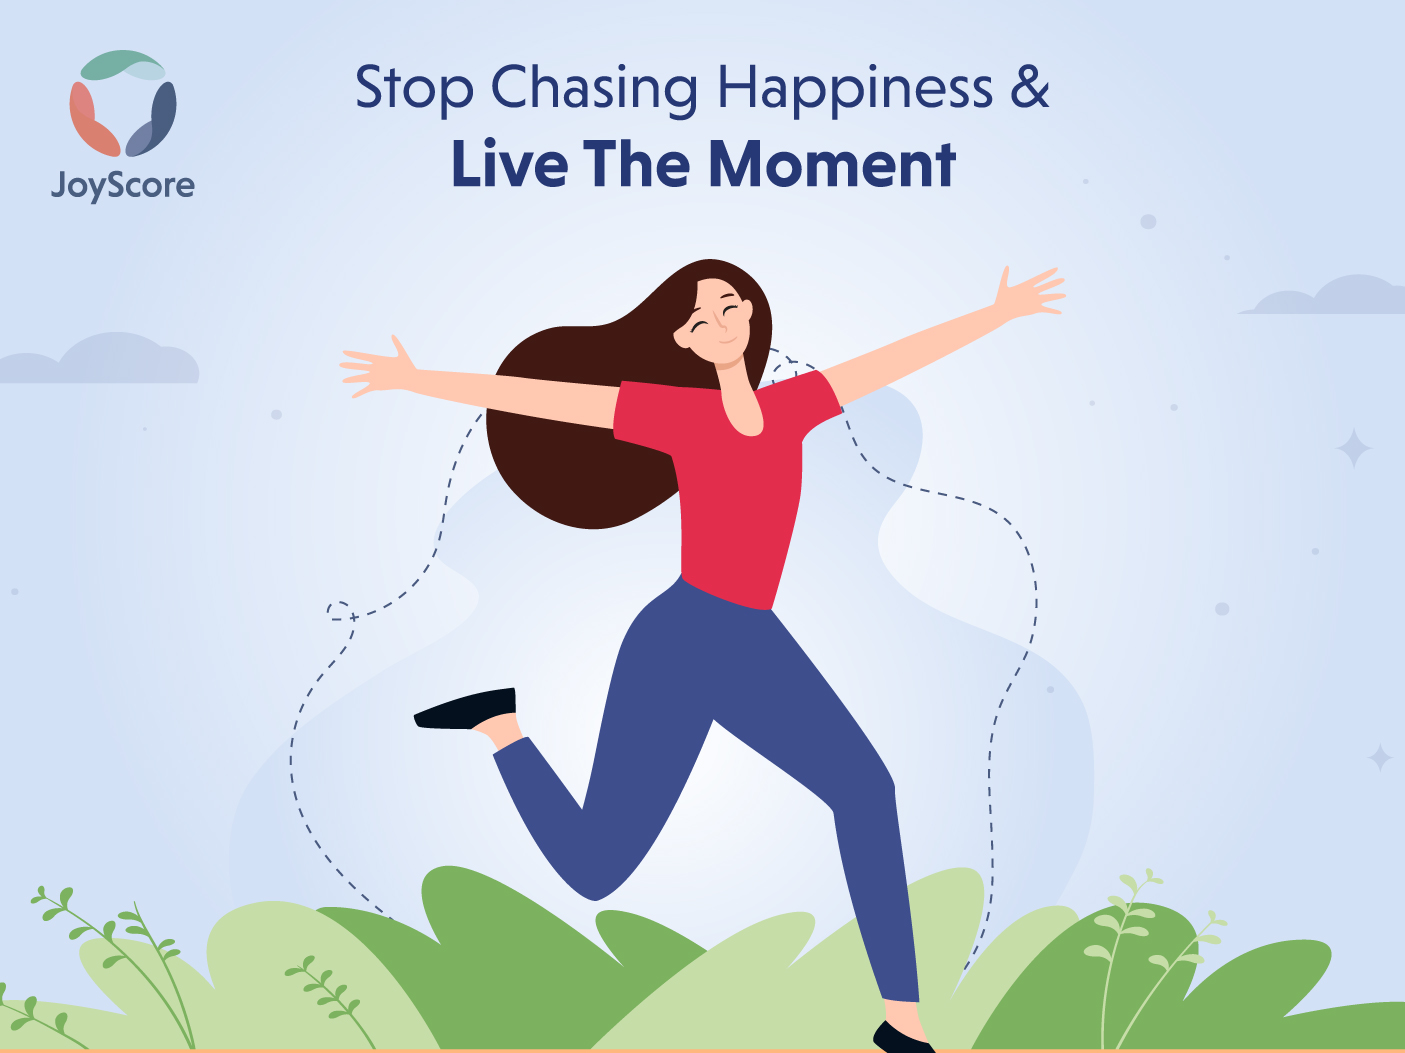 13 Reasons To Stop Chasing Happiness & Live The Moment